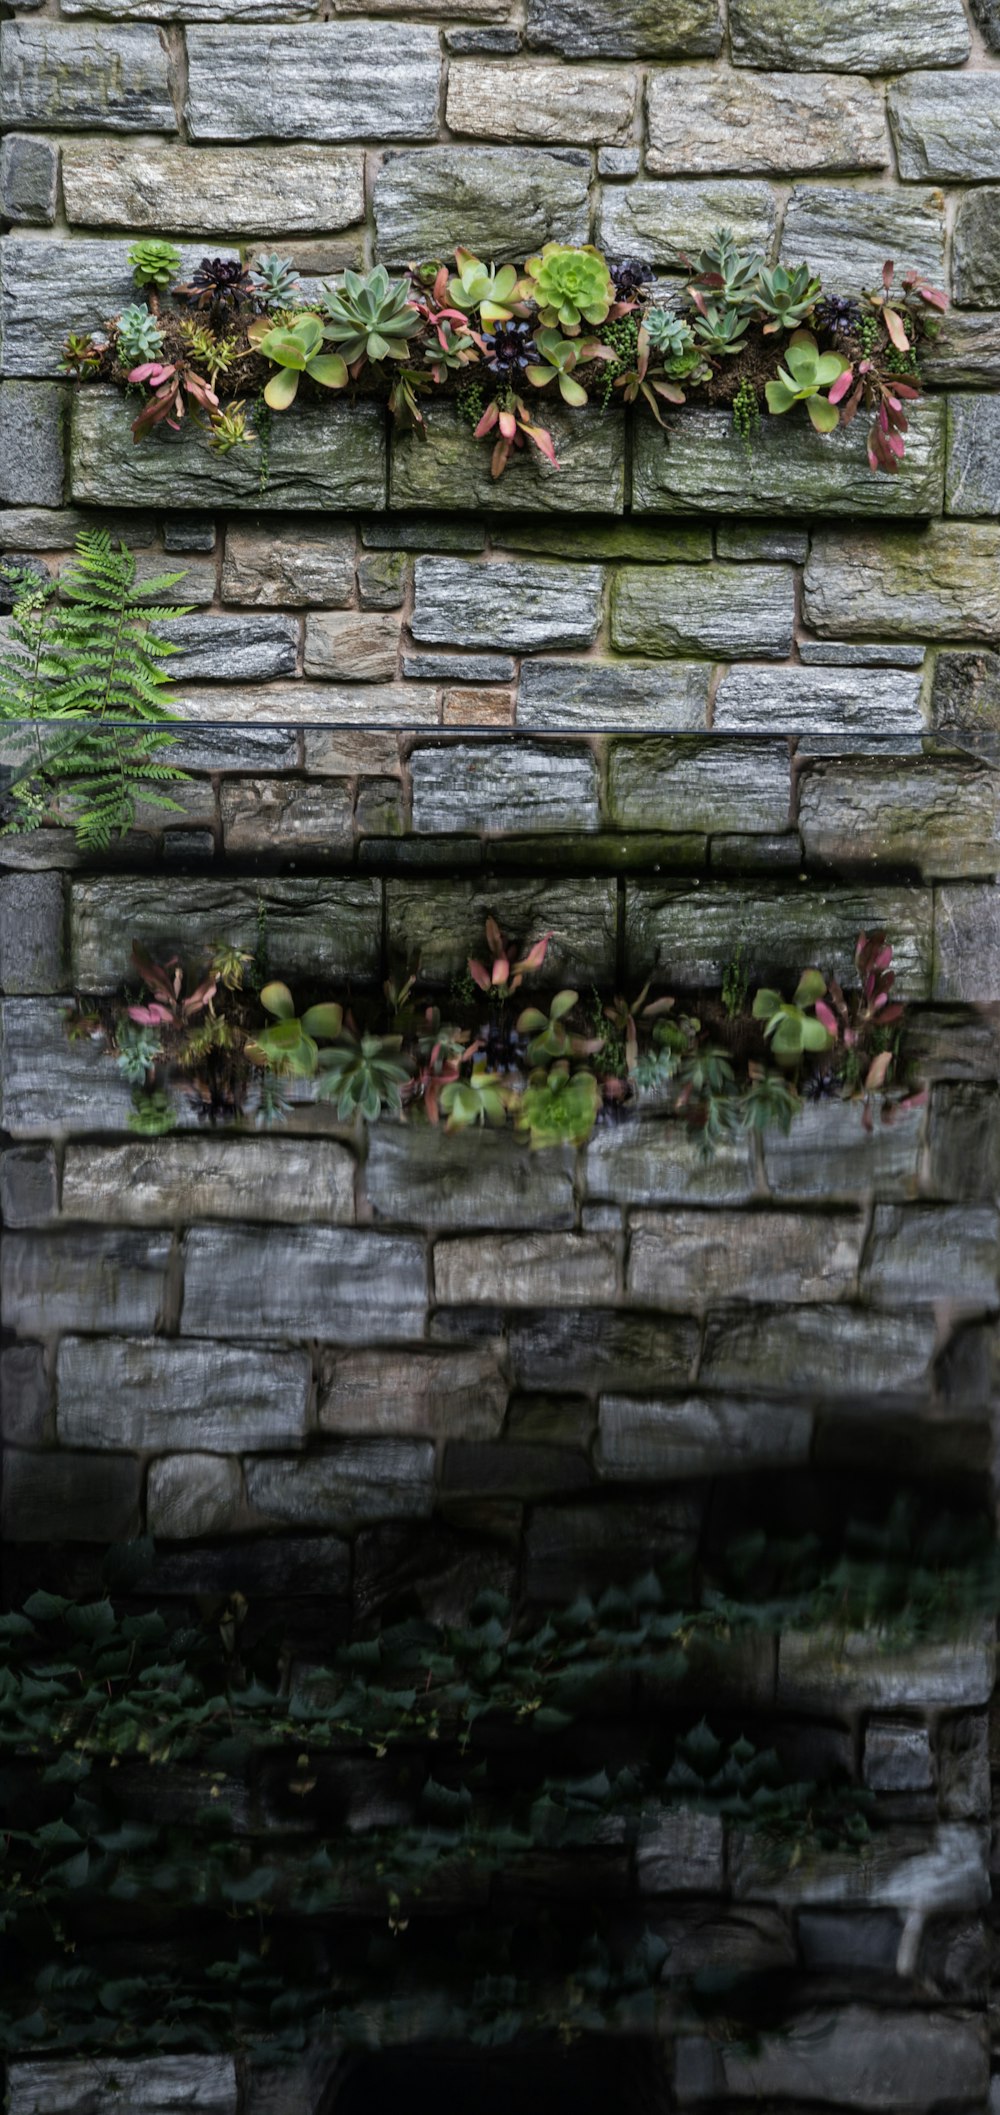 a brick wall with plants growing on it